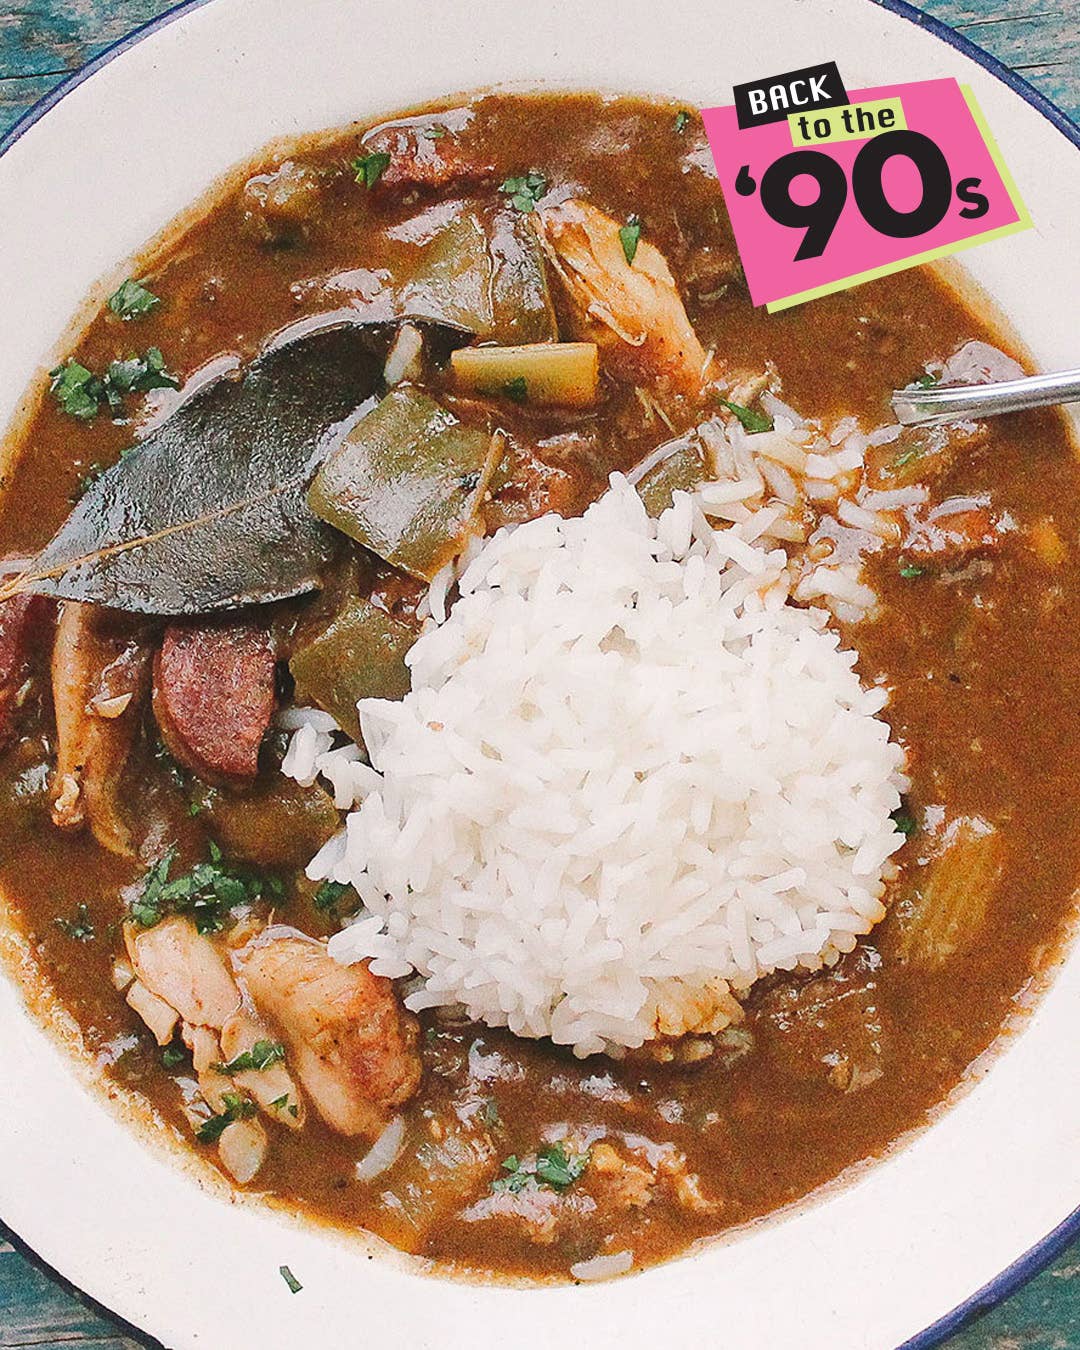 Channel the ‘90s This Soup Season by Making a Big Pot of Gumbo